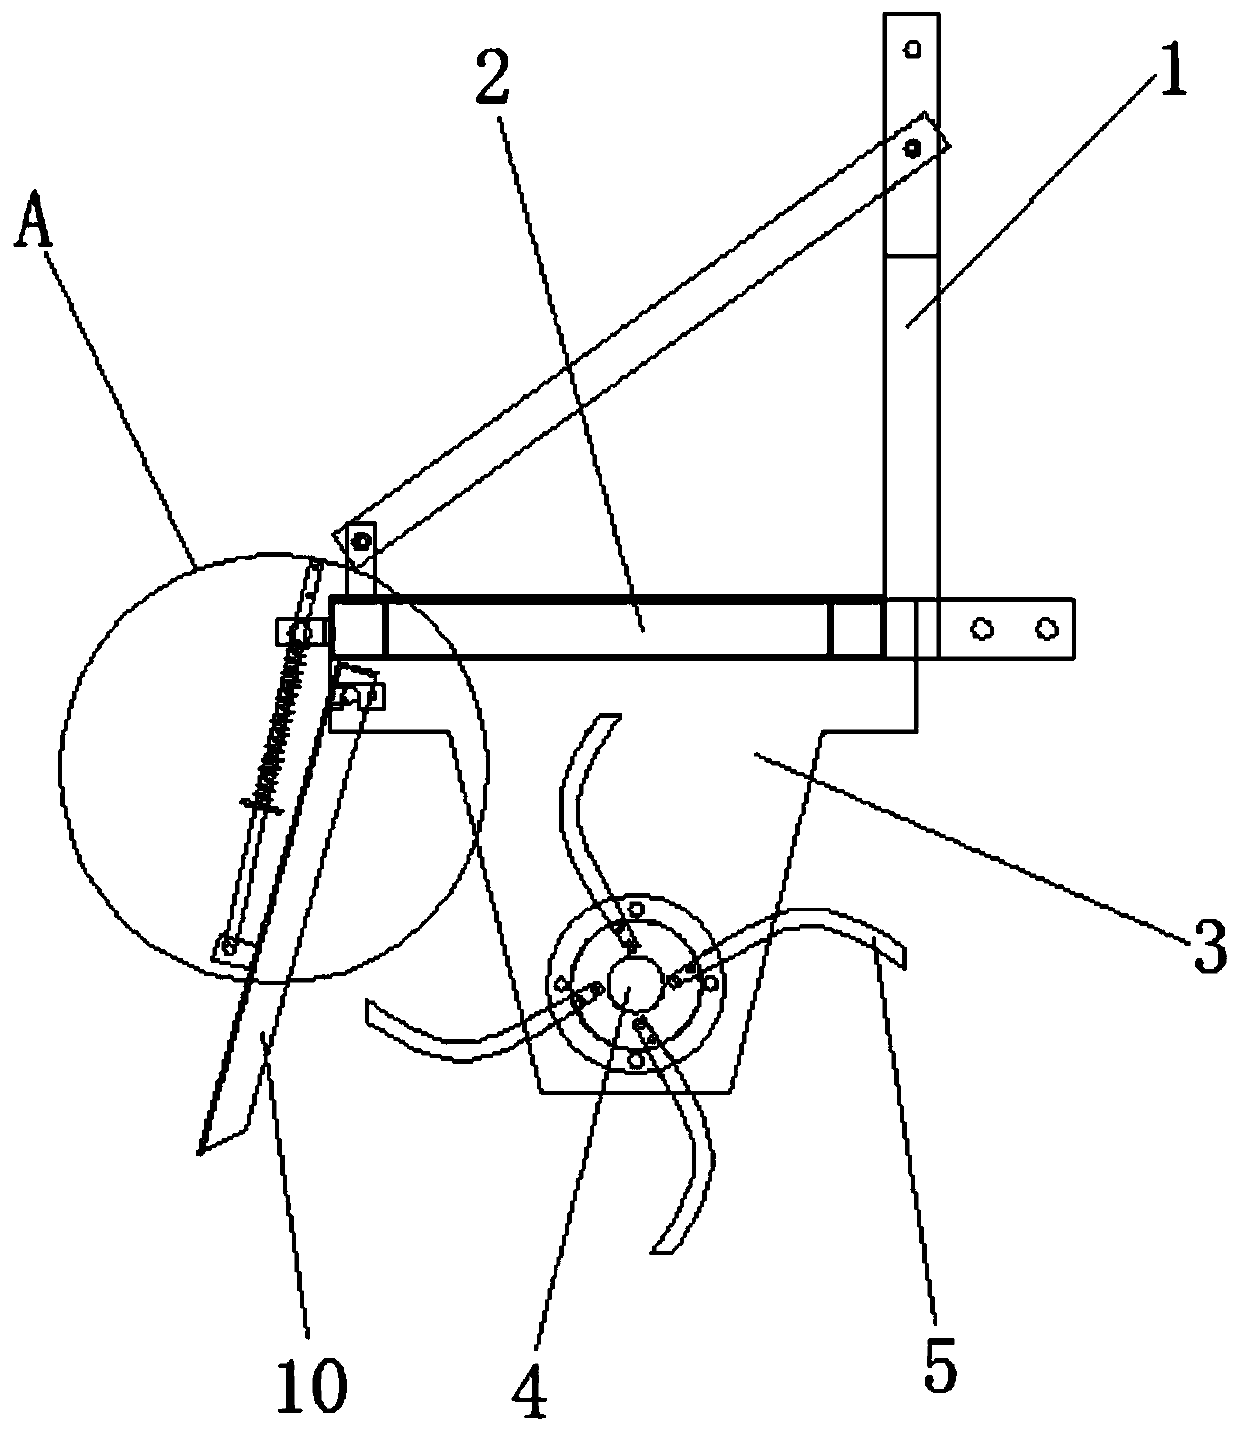 Hydraulic-driven rotary cultivator